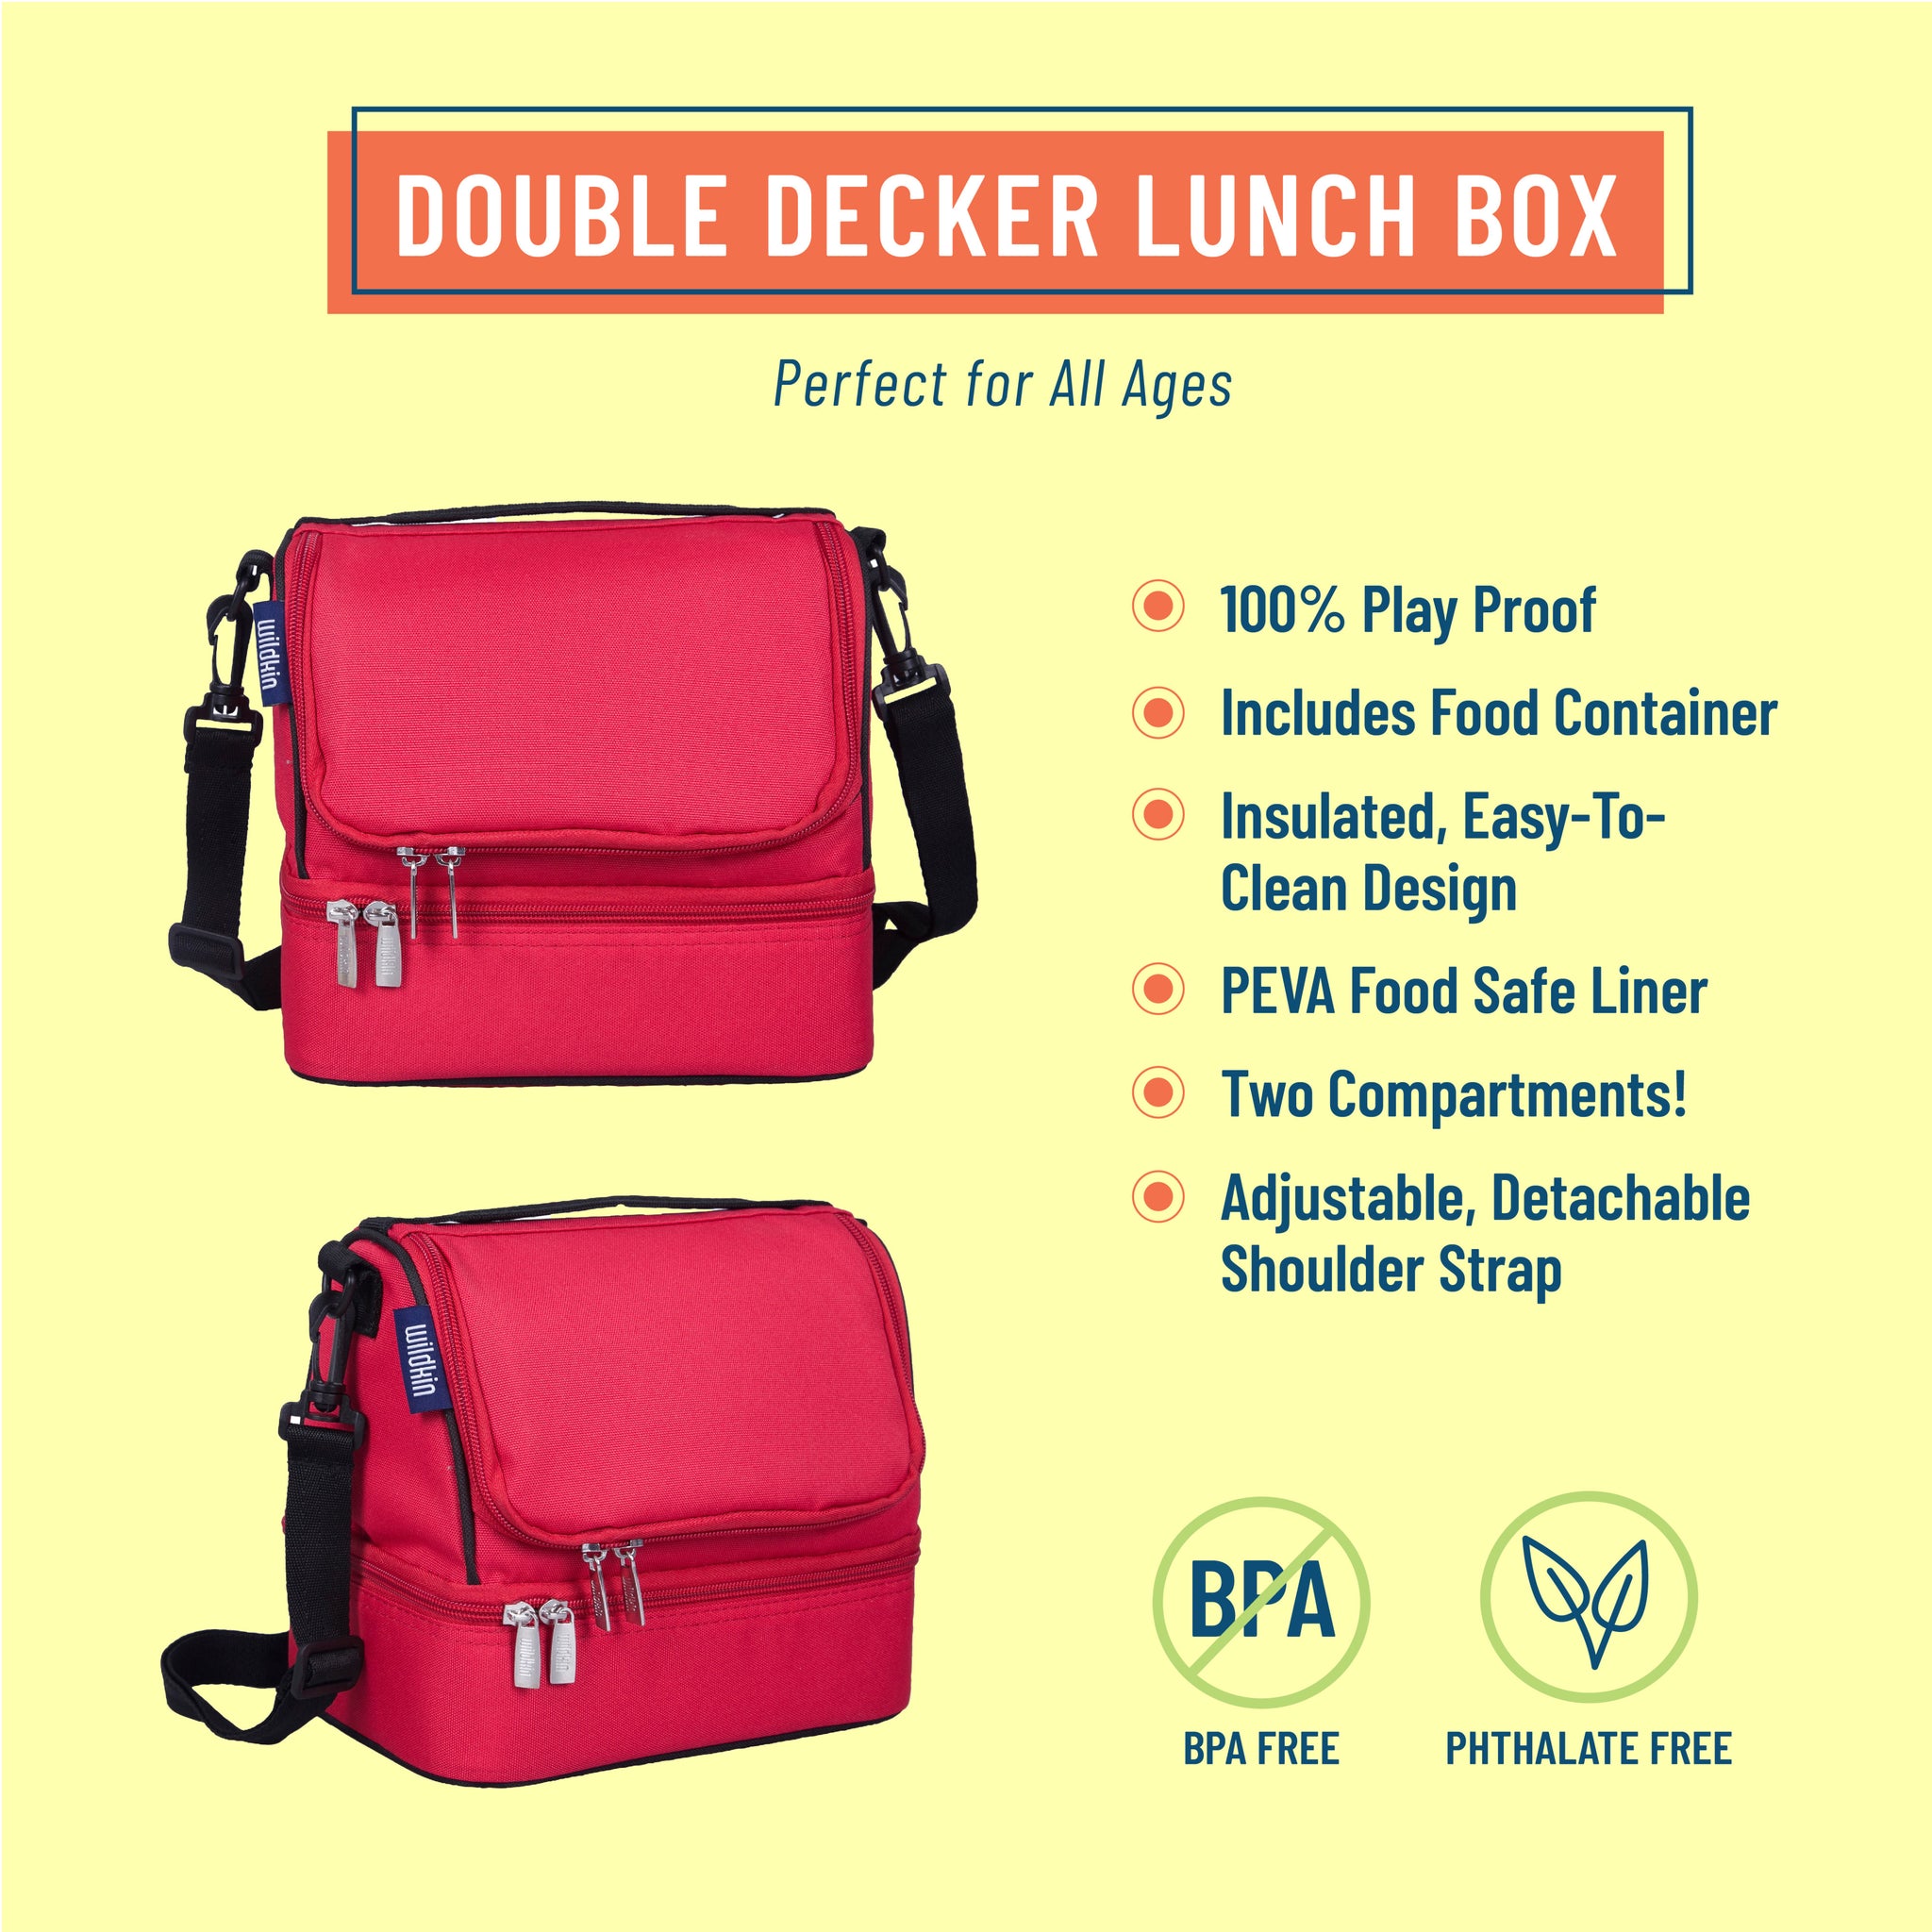  DWONDFORT Fashion Backpack Combination With Lunch Bag